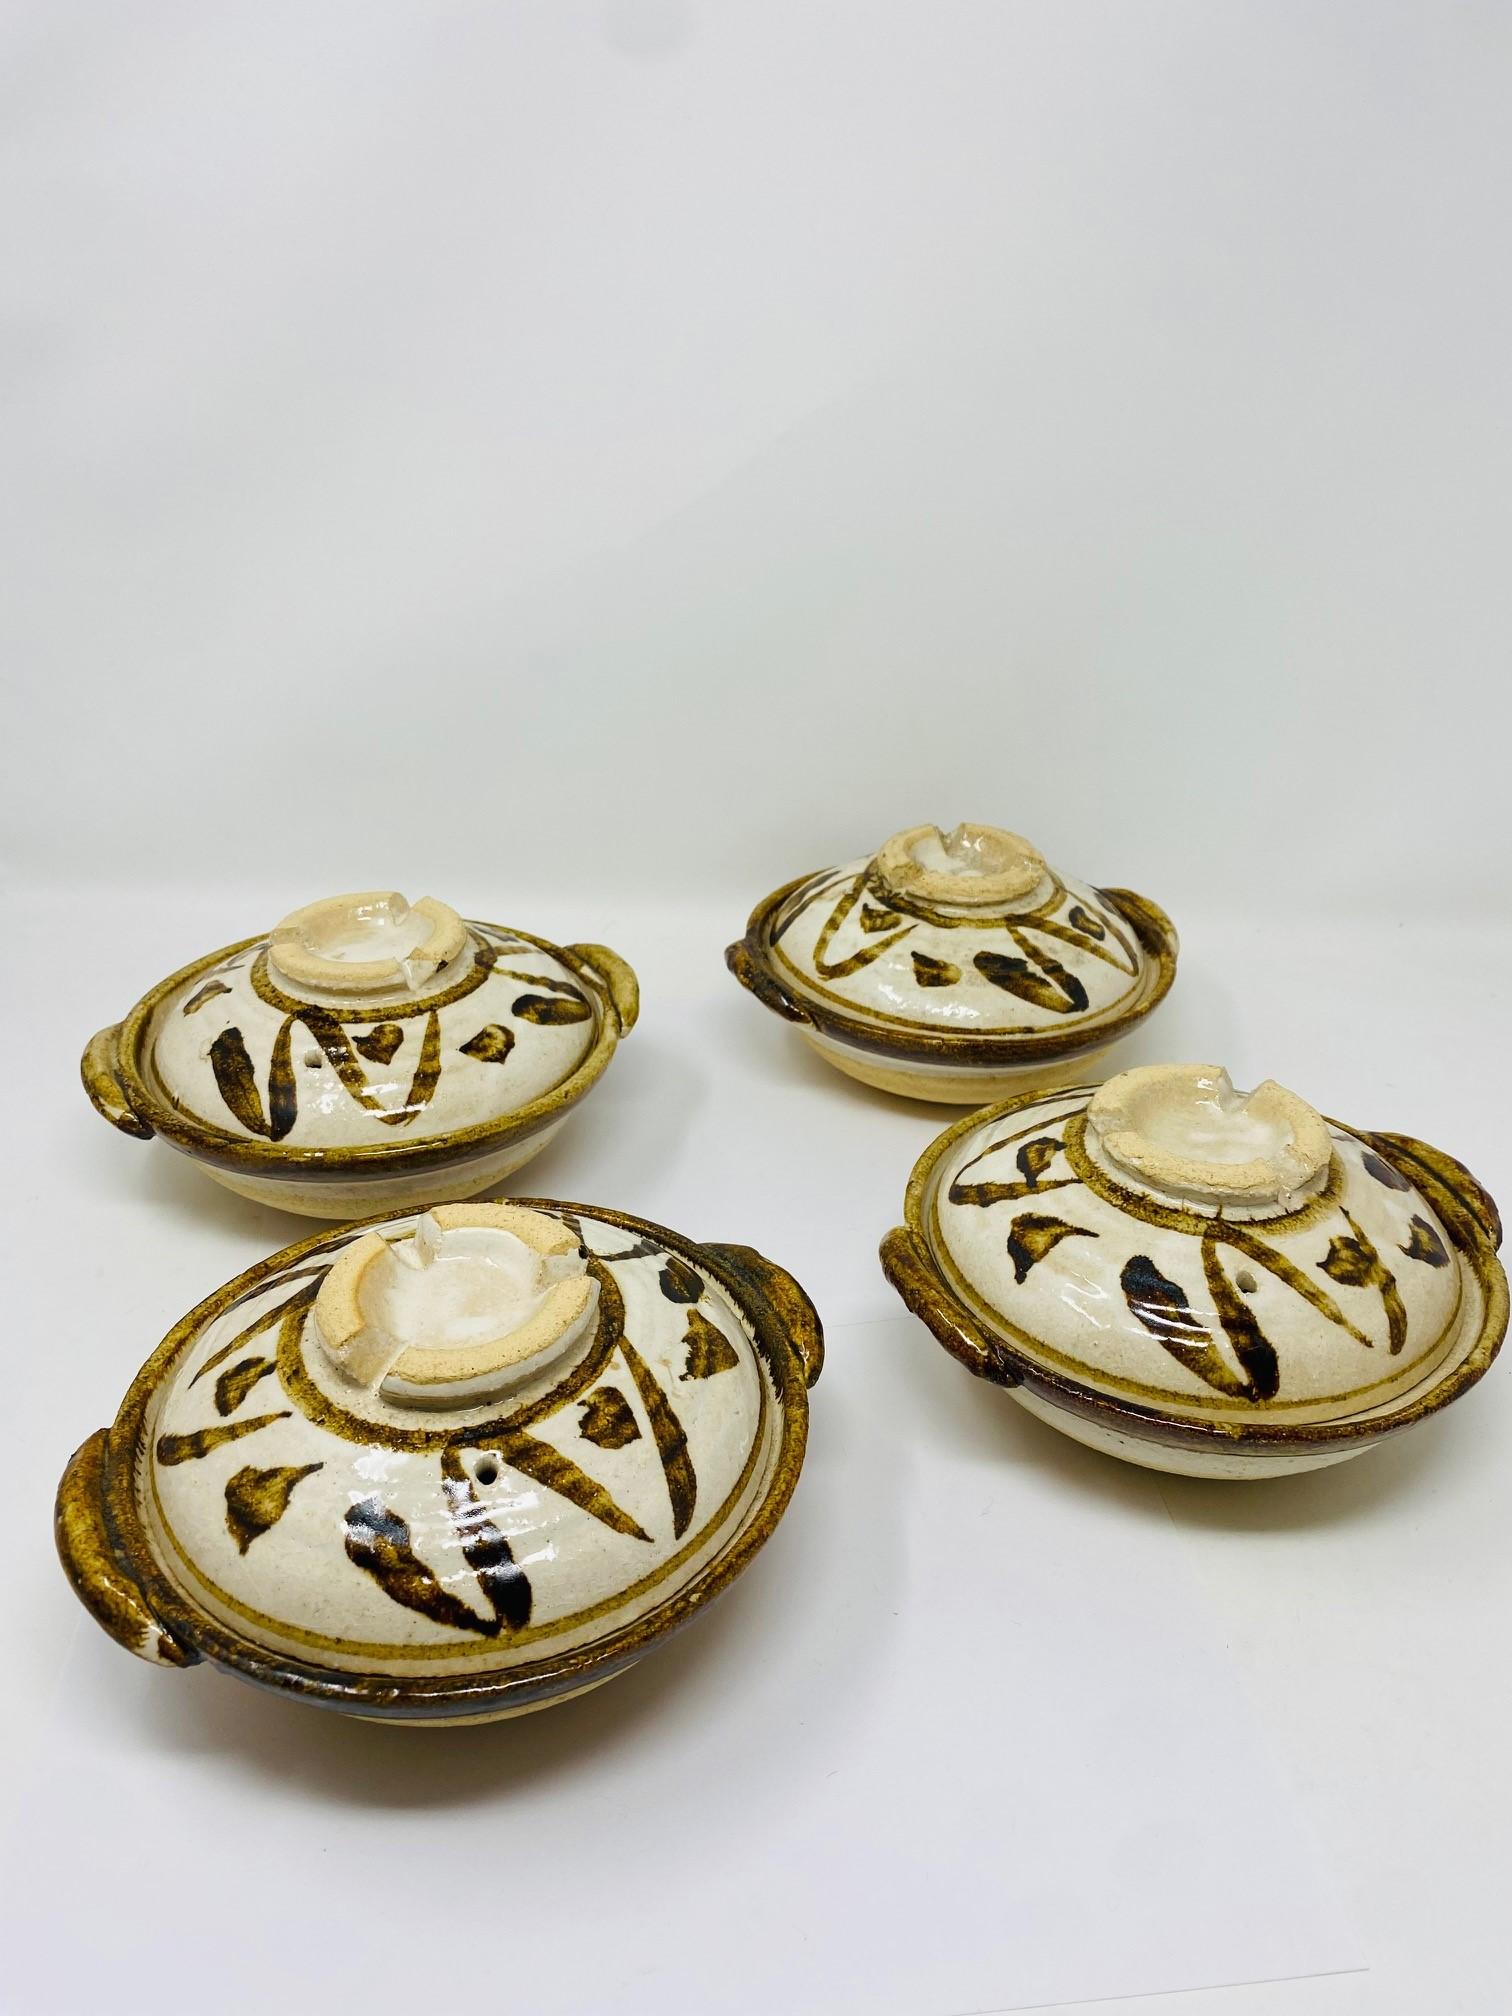 Beautiful set of 2 vintage studio pottery covered bowls.  These handcrafted dishes feature vented lids and shoulder handles. A hand painted abstract design accents the natural beige glazed pottery with dark brown accents.  Beautifully rustic yet